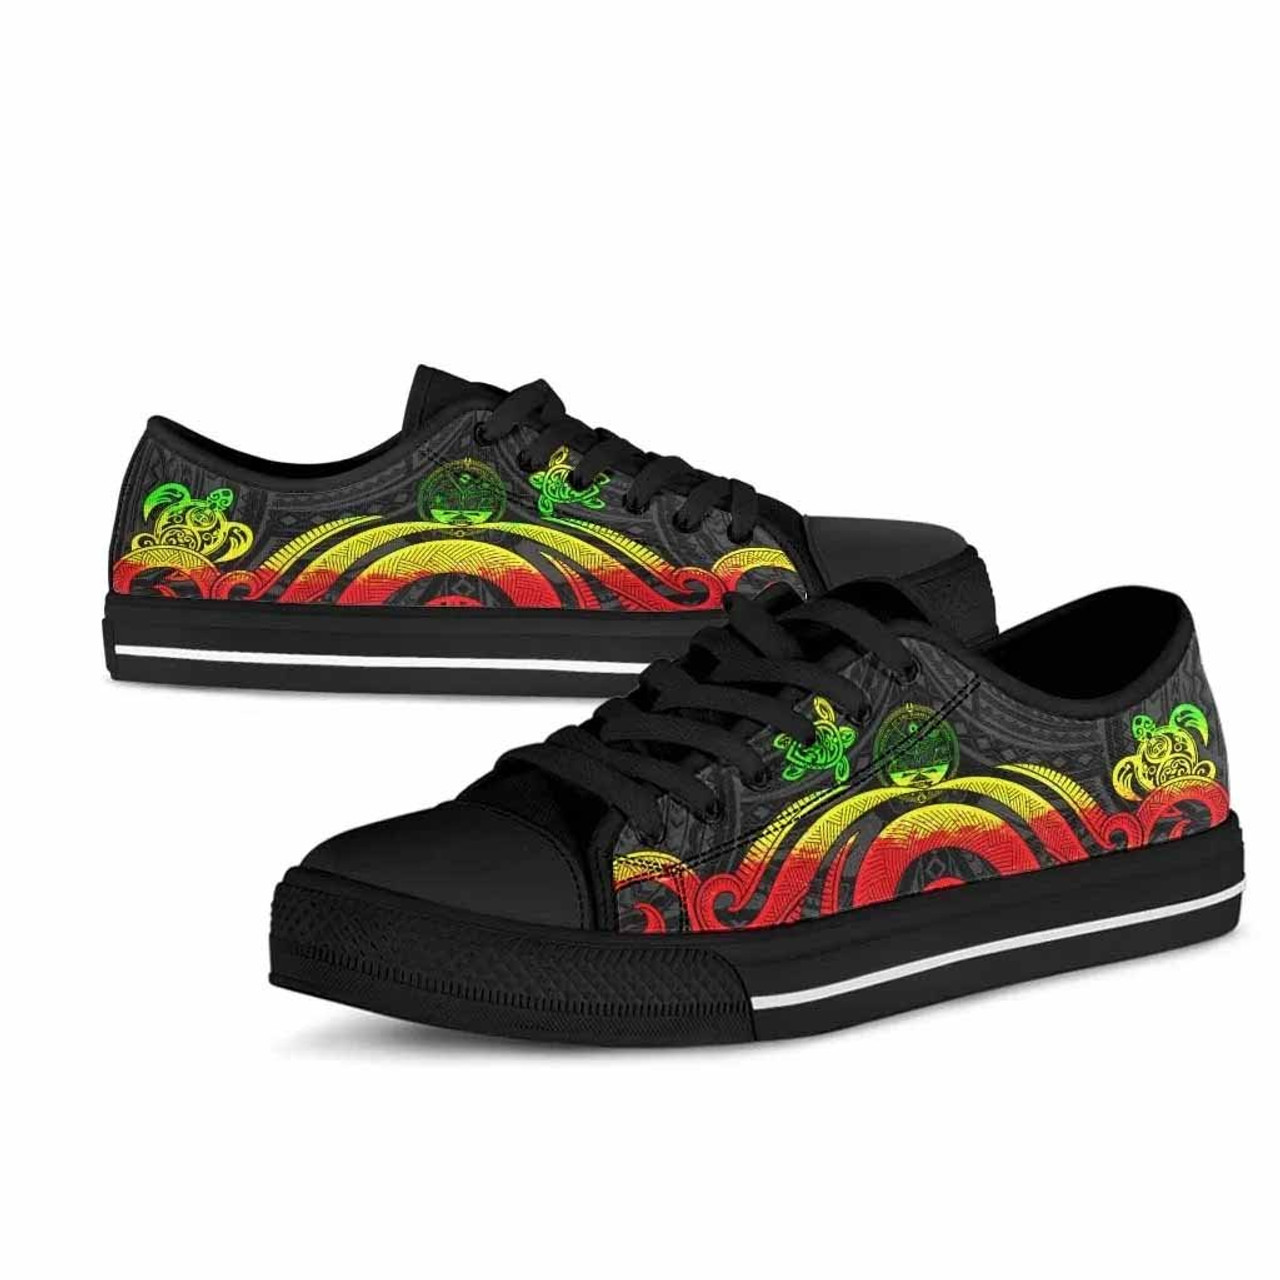 Marshall Islands Low Top Canvas Shoes - Reggae Tentacle Turtle Crest 4